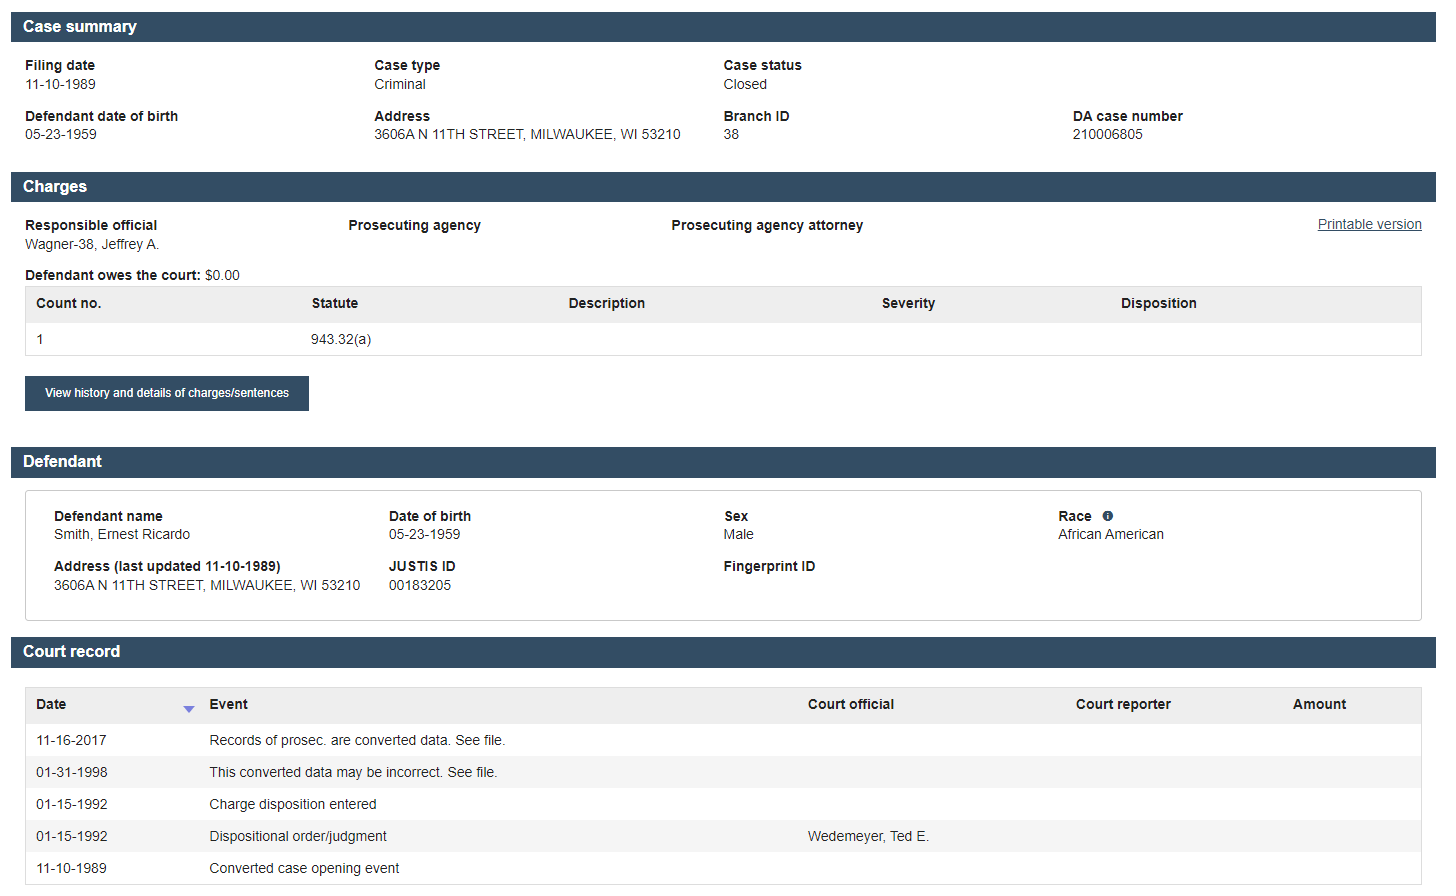 r/TheDahmerCase - Felony charge against Ernest Richard Smith dropped 12 days before Jeff Dahmer's "trial"